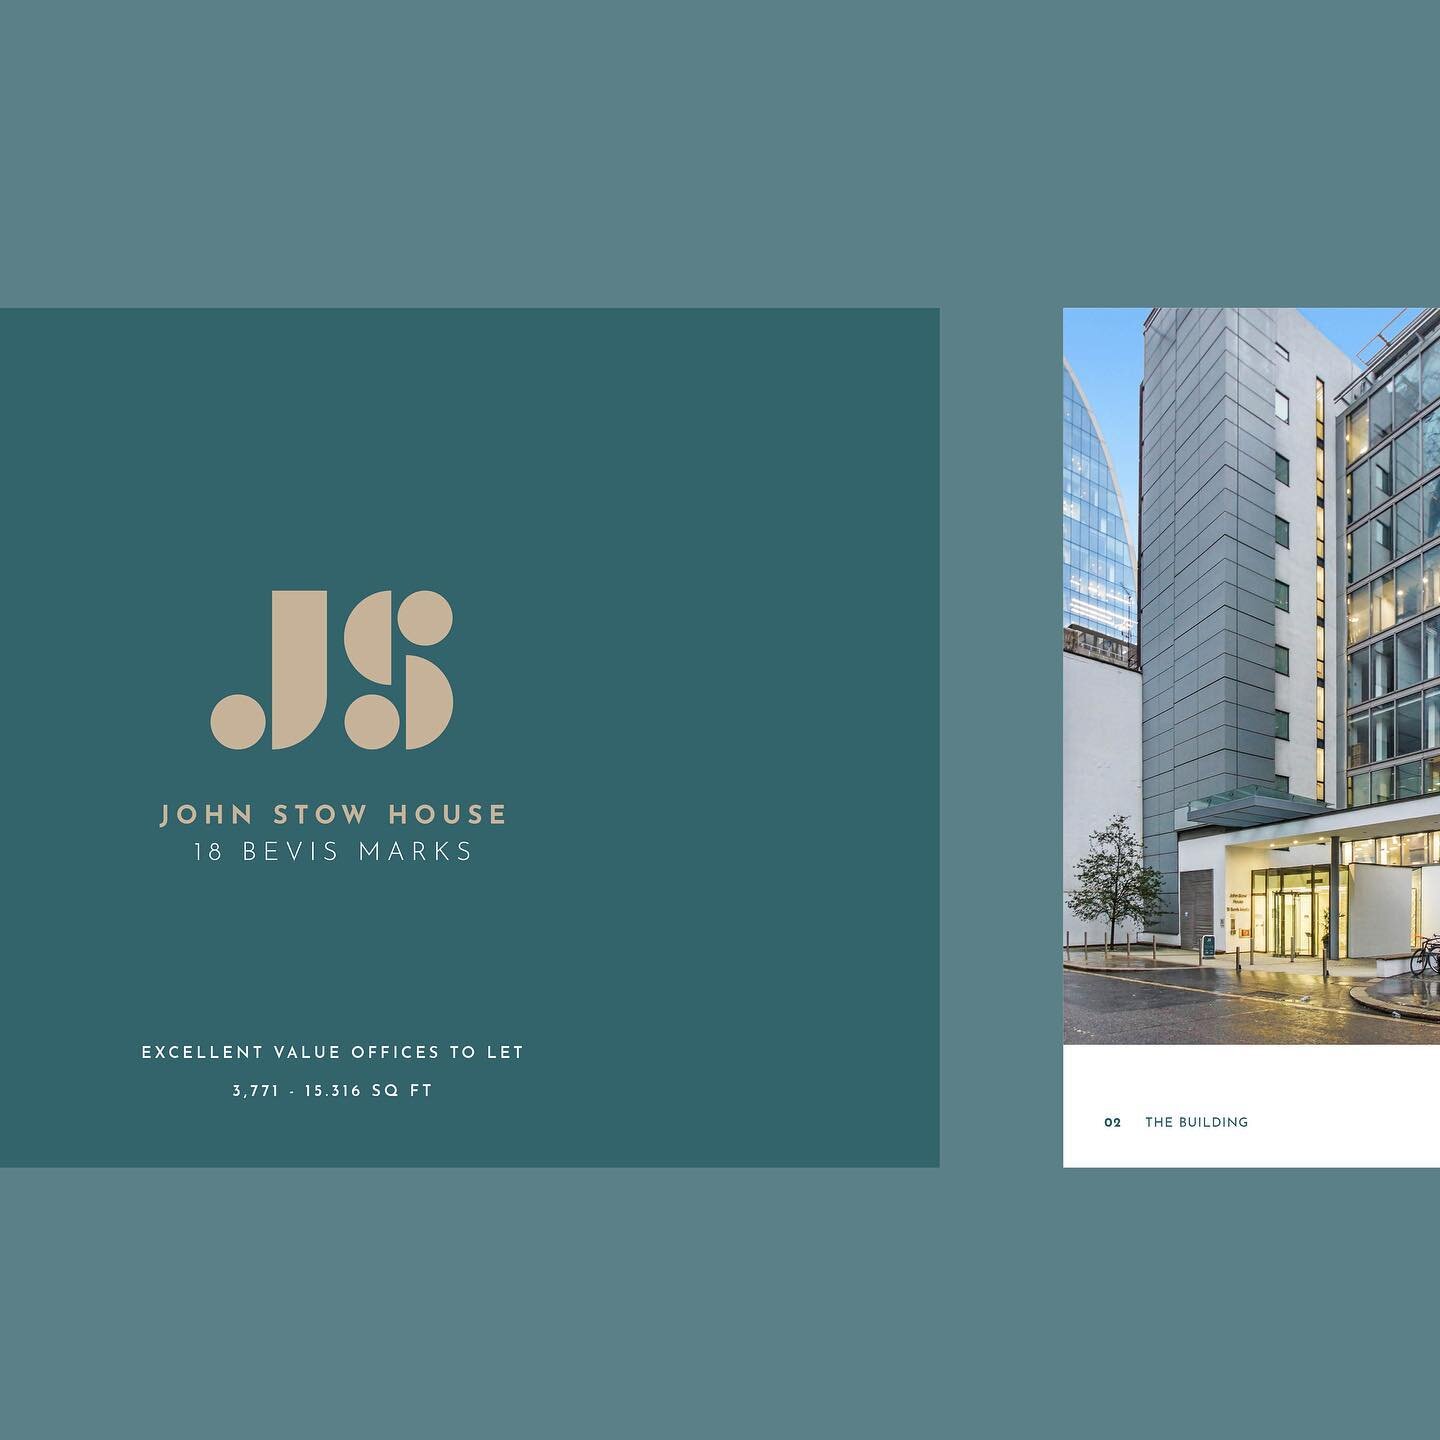 #TBT to this slick campaign we did for John Stow House. 

Our wonderful clients @newton_perkins recently completed on letting this space and we&rsquo;re delighted for them! Congrats team Newton Perkins - looking forward to providing many more campaig